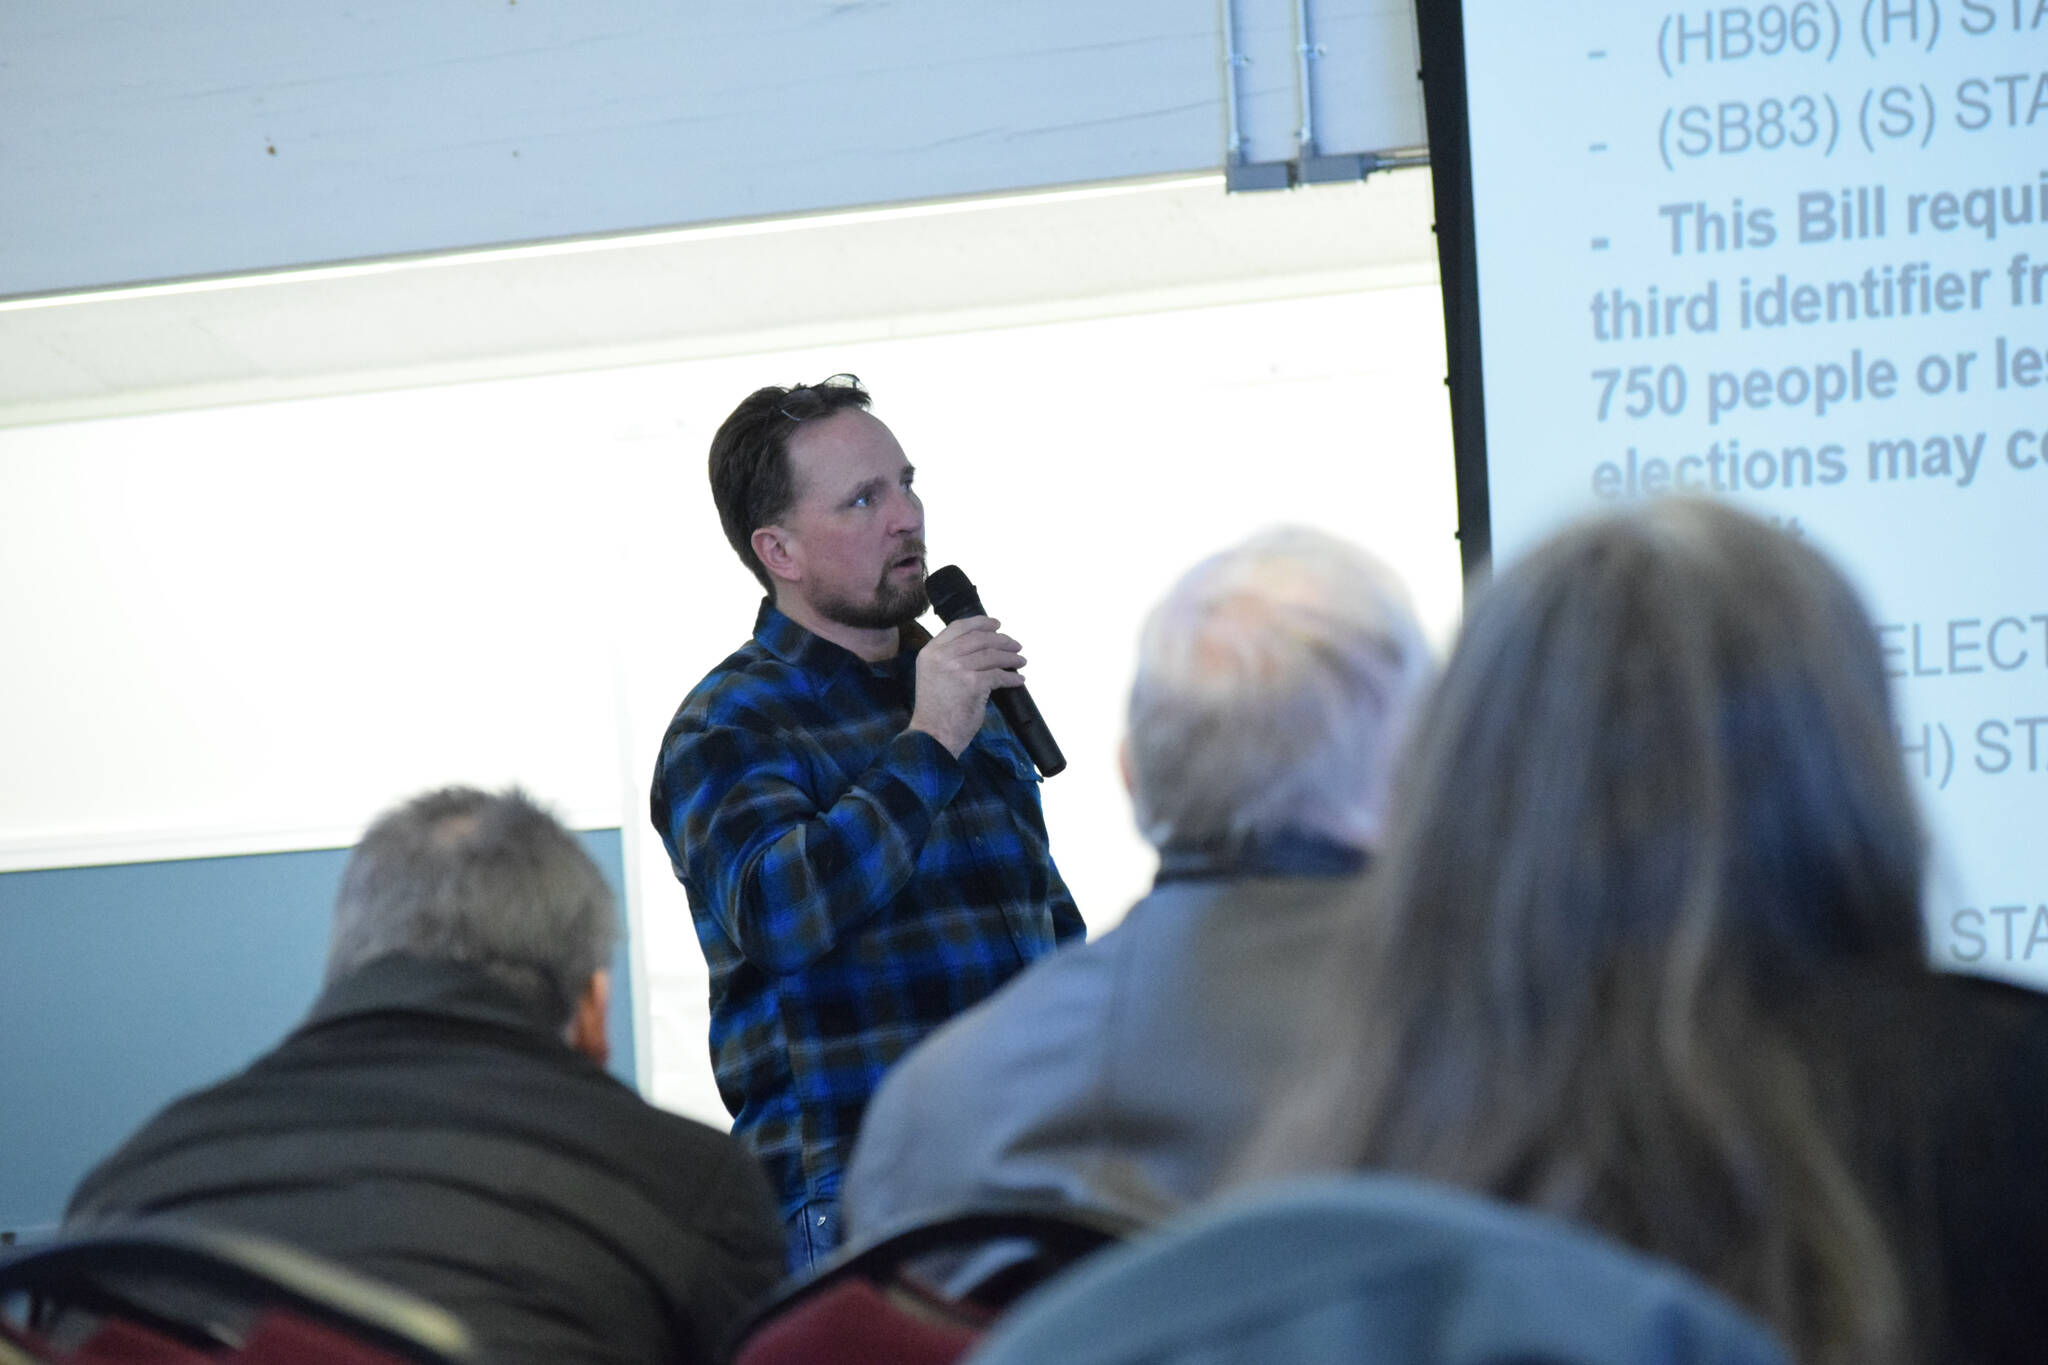 House Rep. Ben Carpenter speaks at a town hal meeting in Nikiski on Saturday, March 5, 2022. (Camille Botello / Peninsula Clarion)